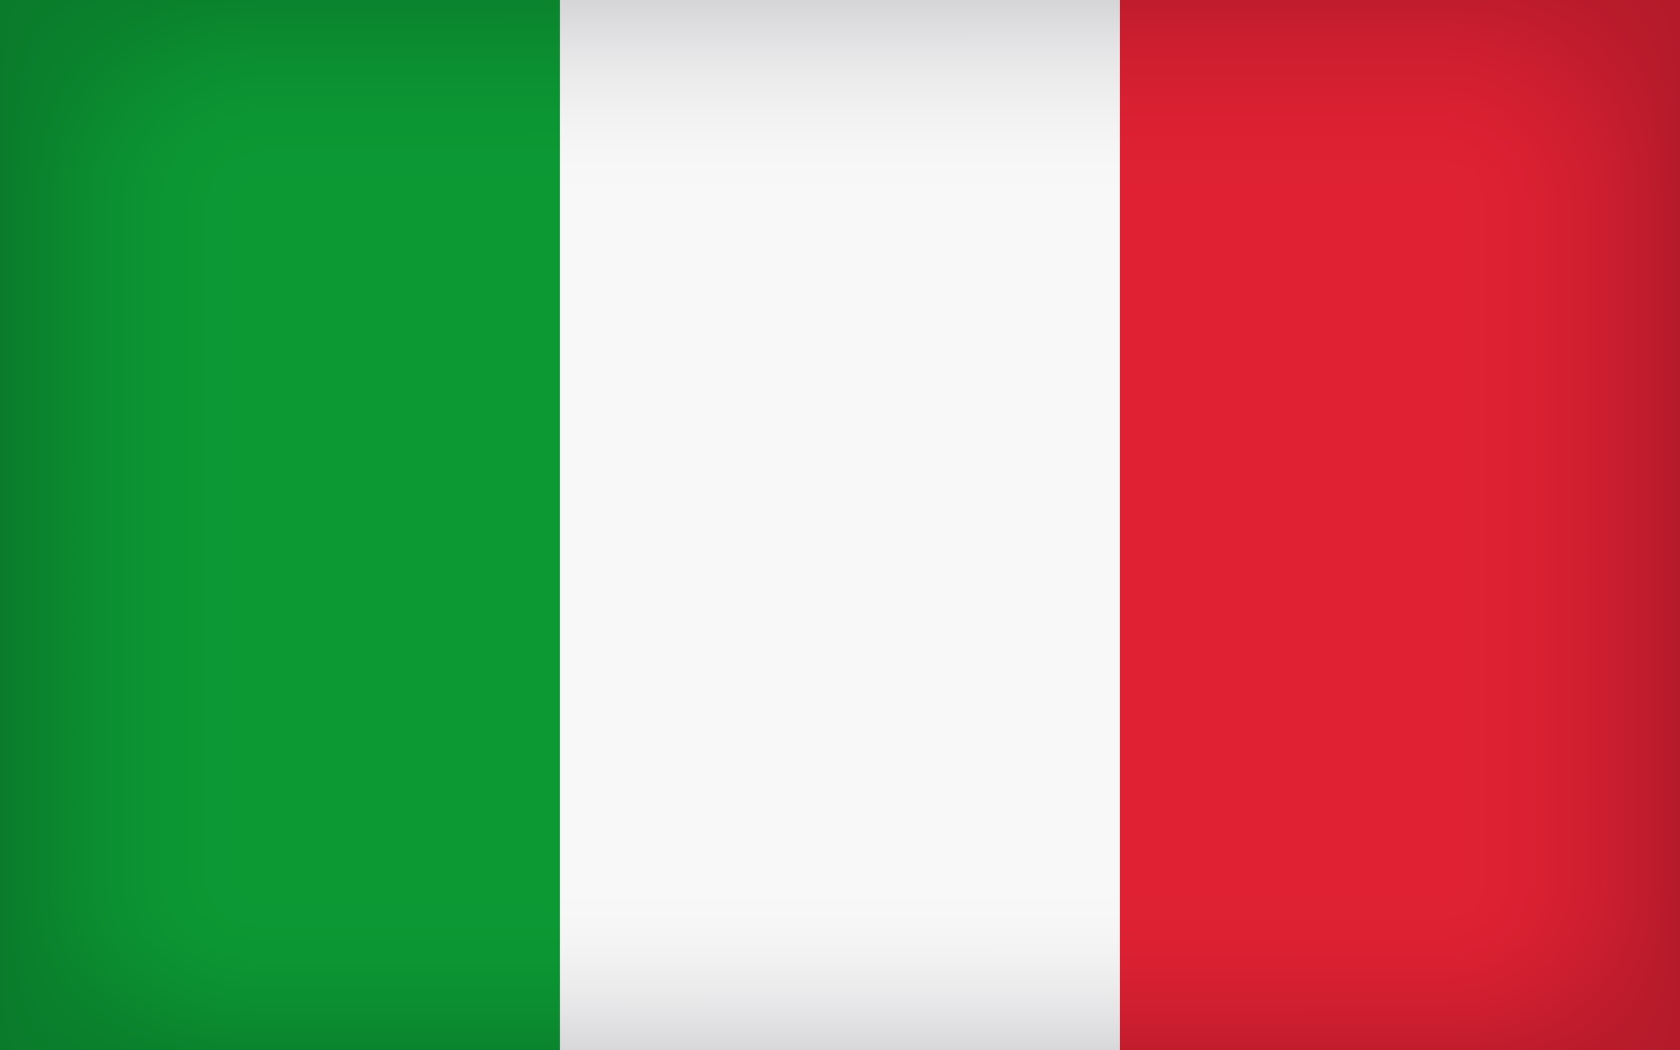 Tricolor flag of Italy